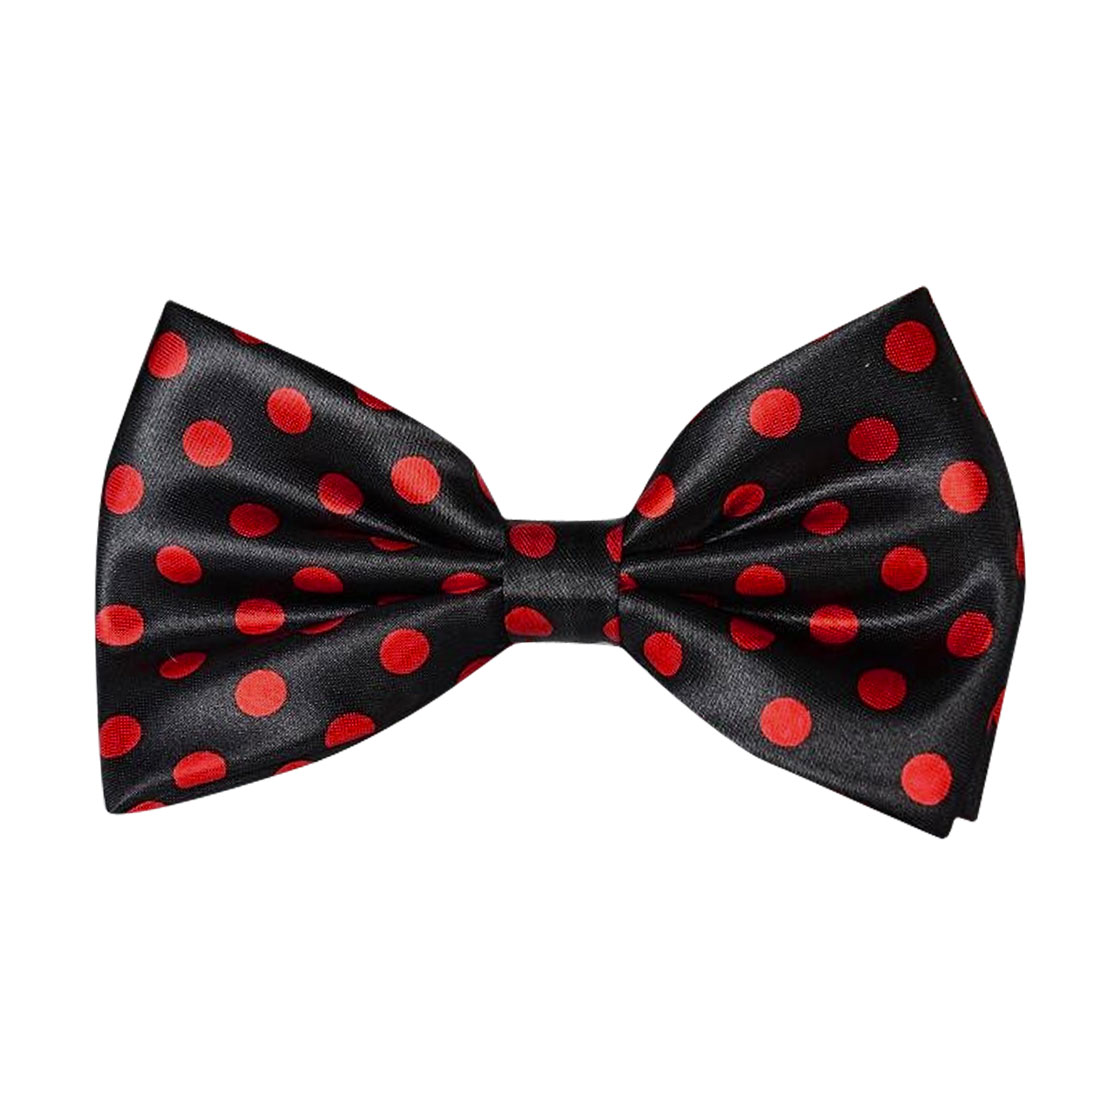 Stretchy band two layer dots pattern party formal bow tie black red